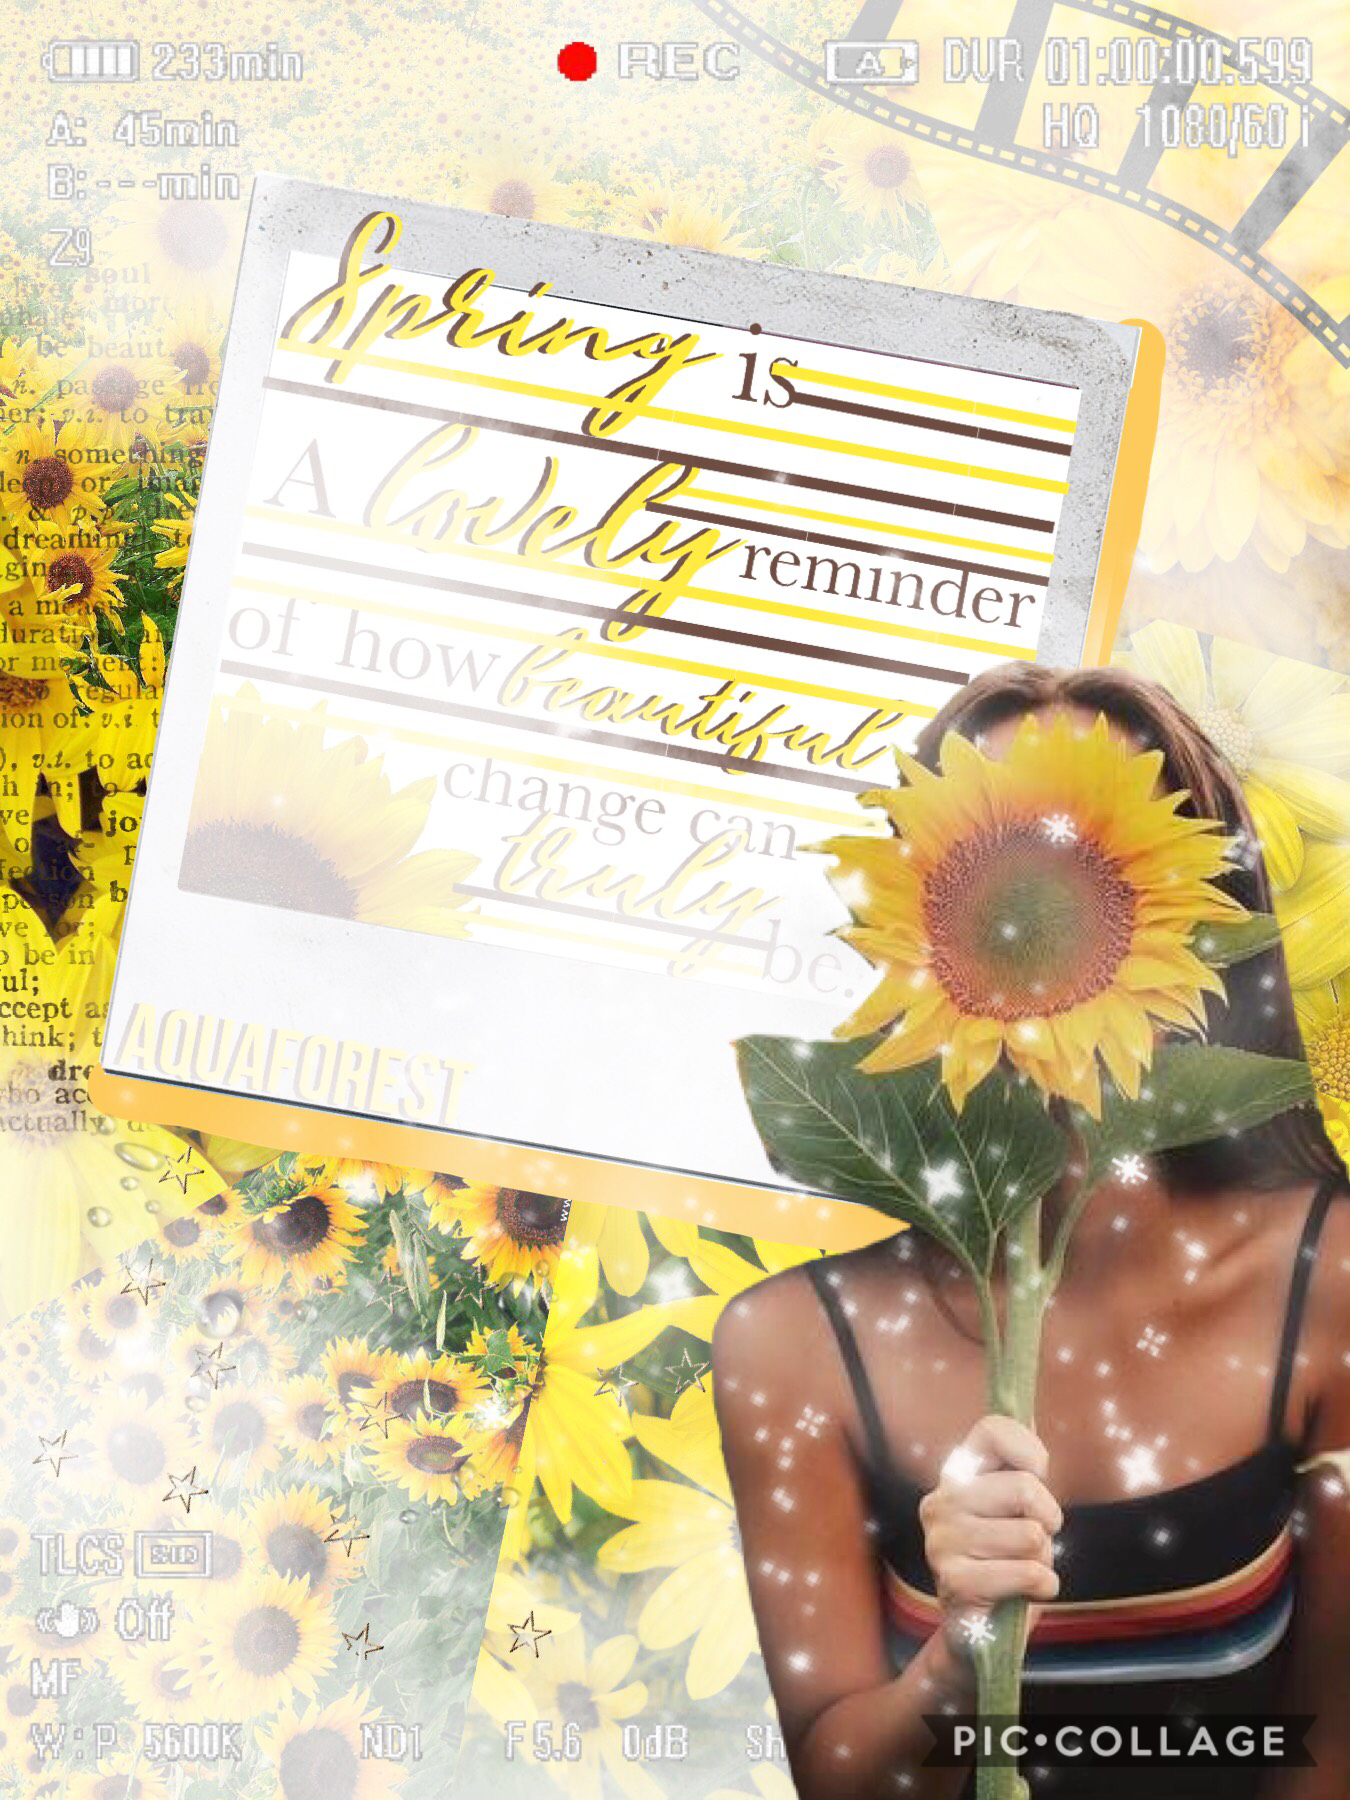 🌻tap🌻 
I kinda like this text style!
This was supposed to be a spring themed collage since I already did winter and fall, but sunflower images are earlier to find online so....
Png credit: -SoulfulVibes- (yEs I keep using the same pngs sorry)